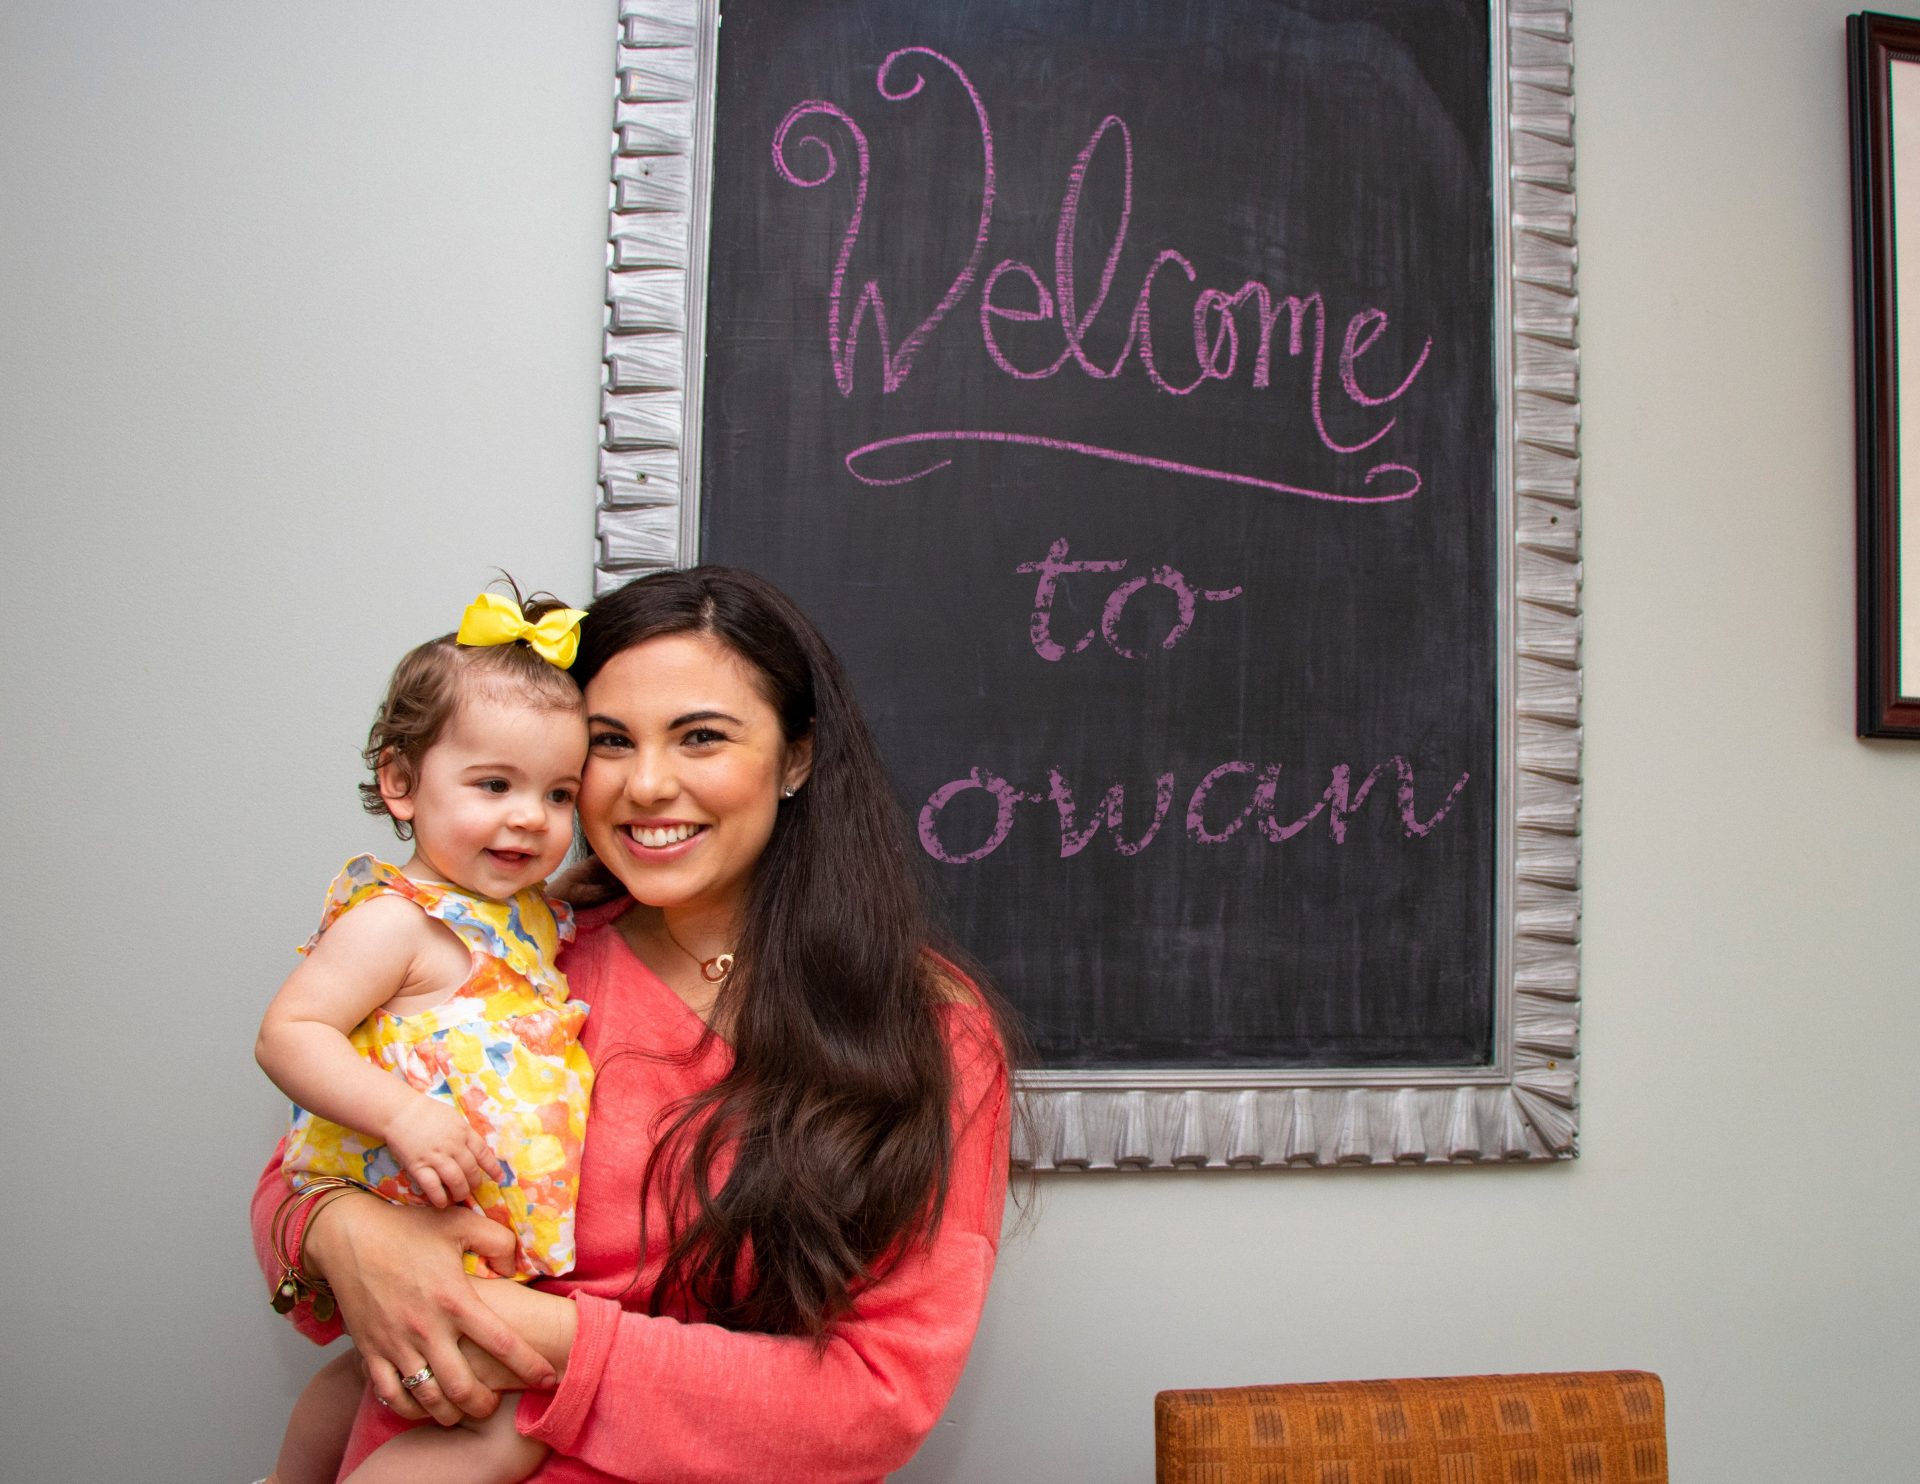 A woman wearing a pink shirt holding a baby girl in front of a decorative chalkboard